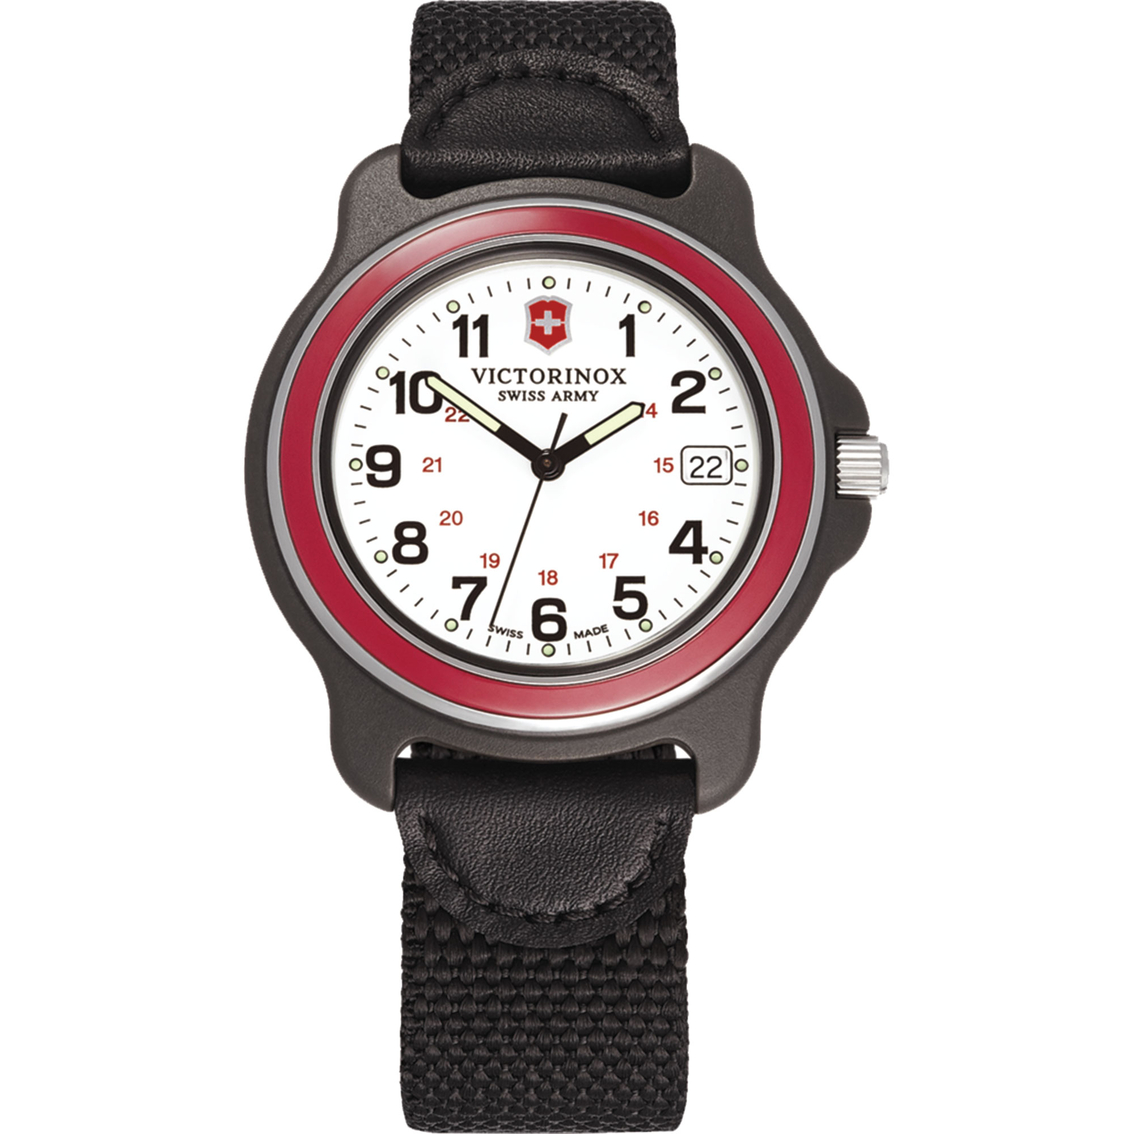 Victorinox Swiss Army Original Xl Red Bezel And White Dial Sport Watch 